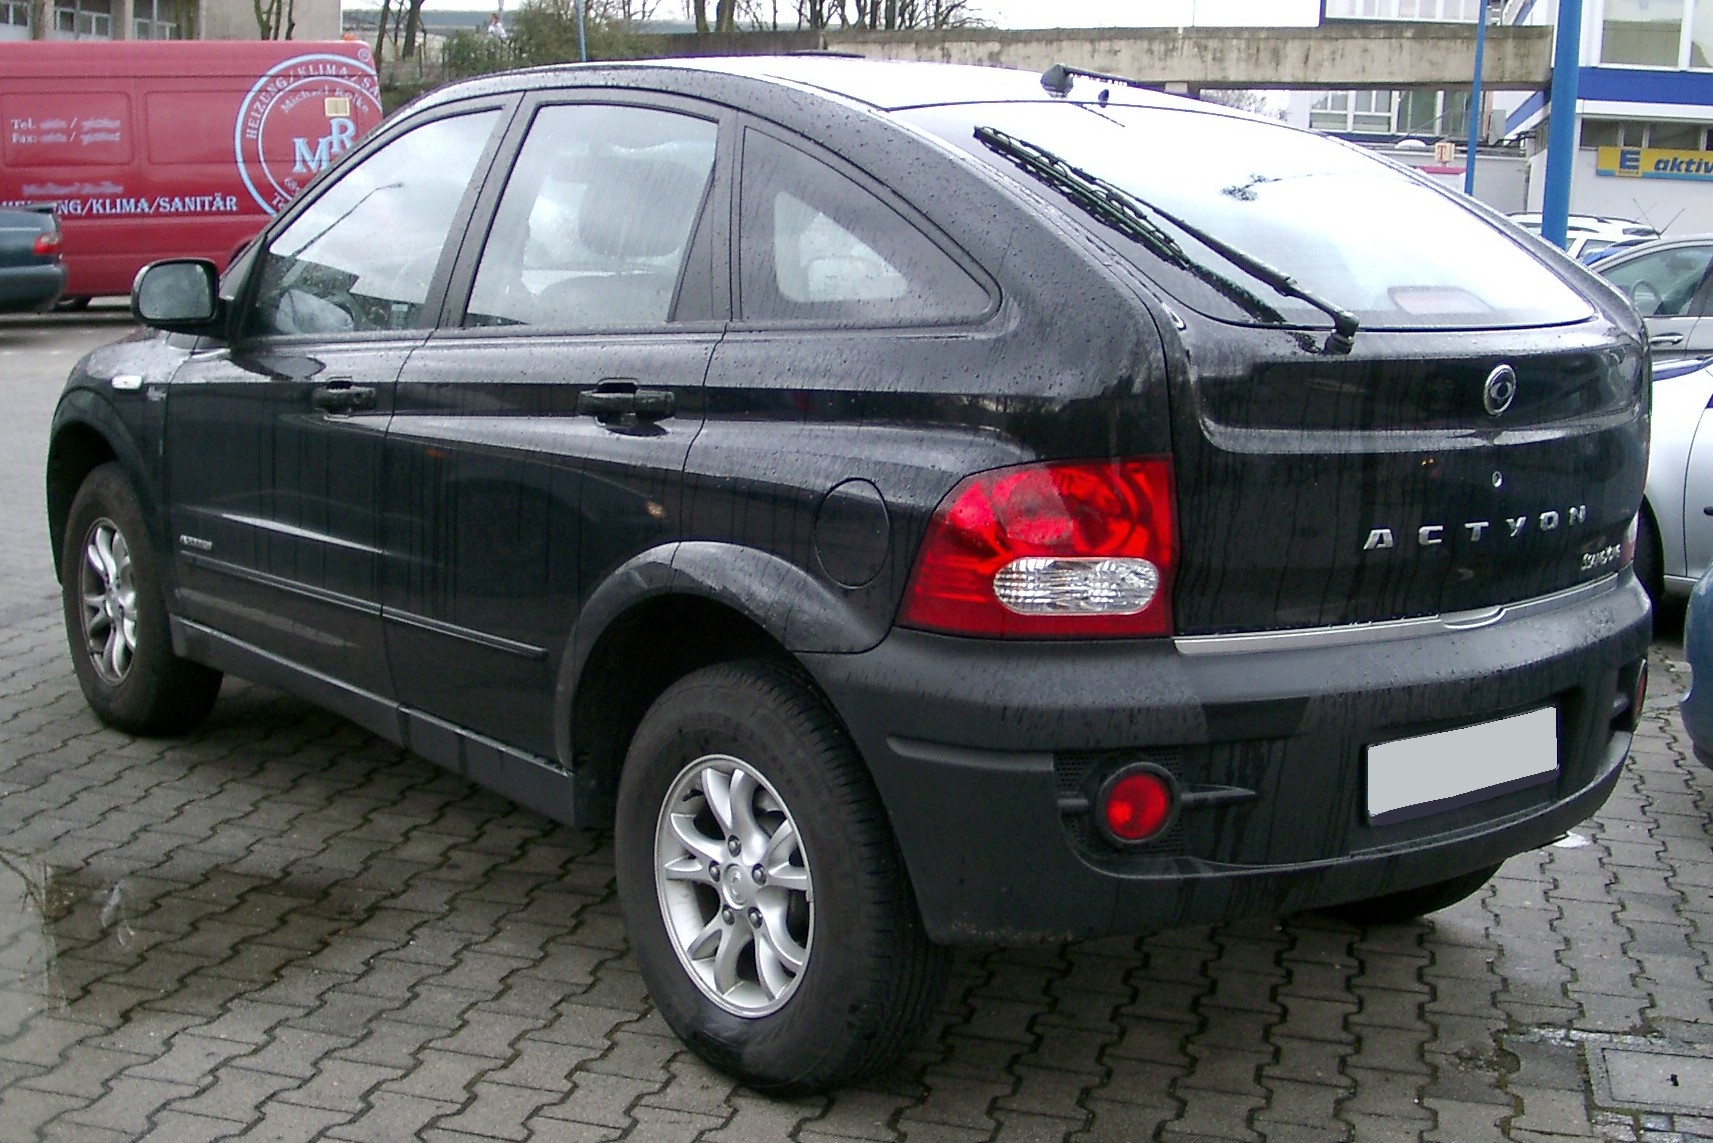 Dossier: Ssangyong Actyon arrière 20080303.jpg - Wikimedia Commons